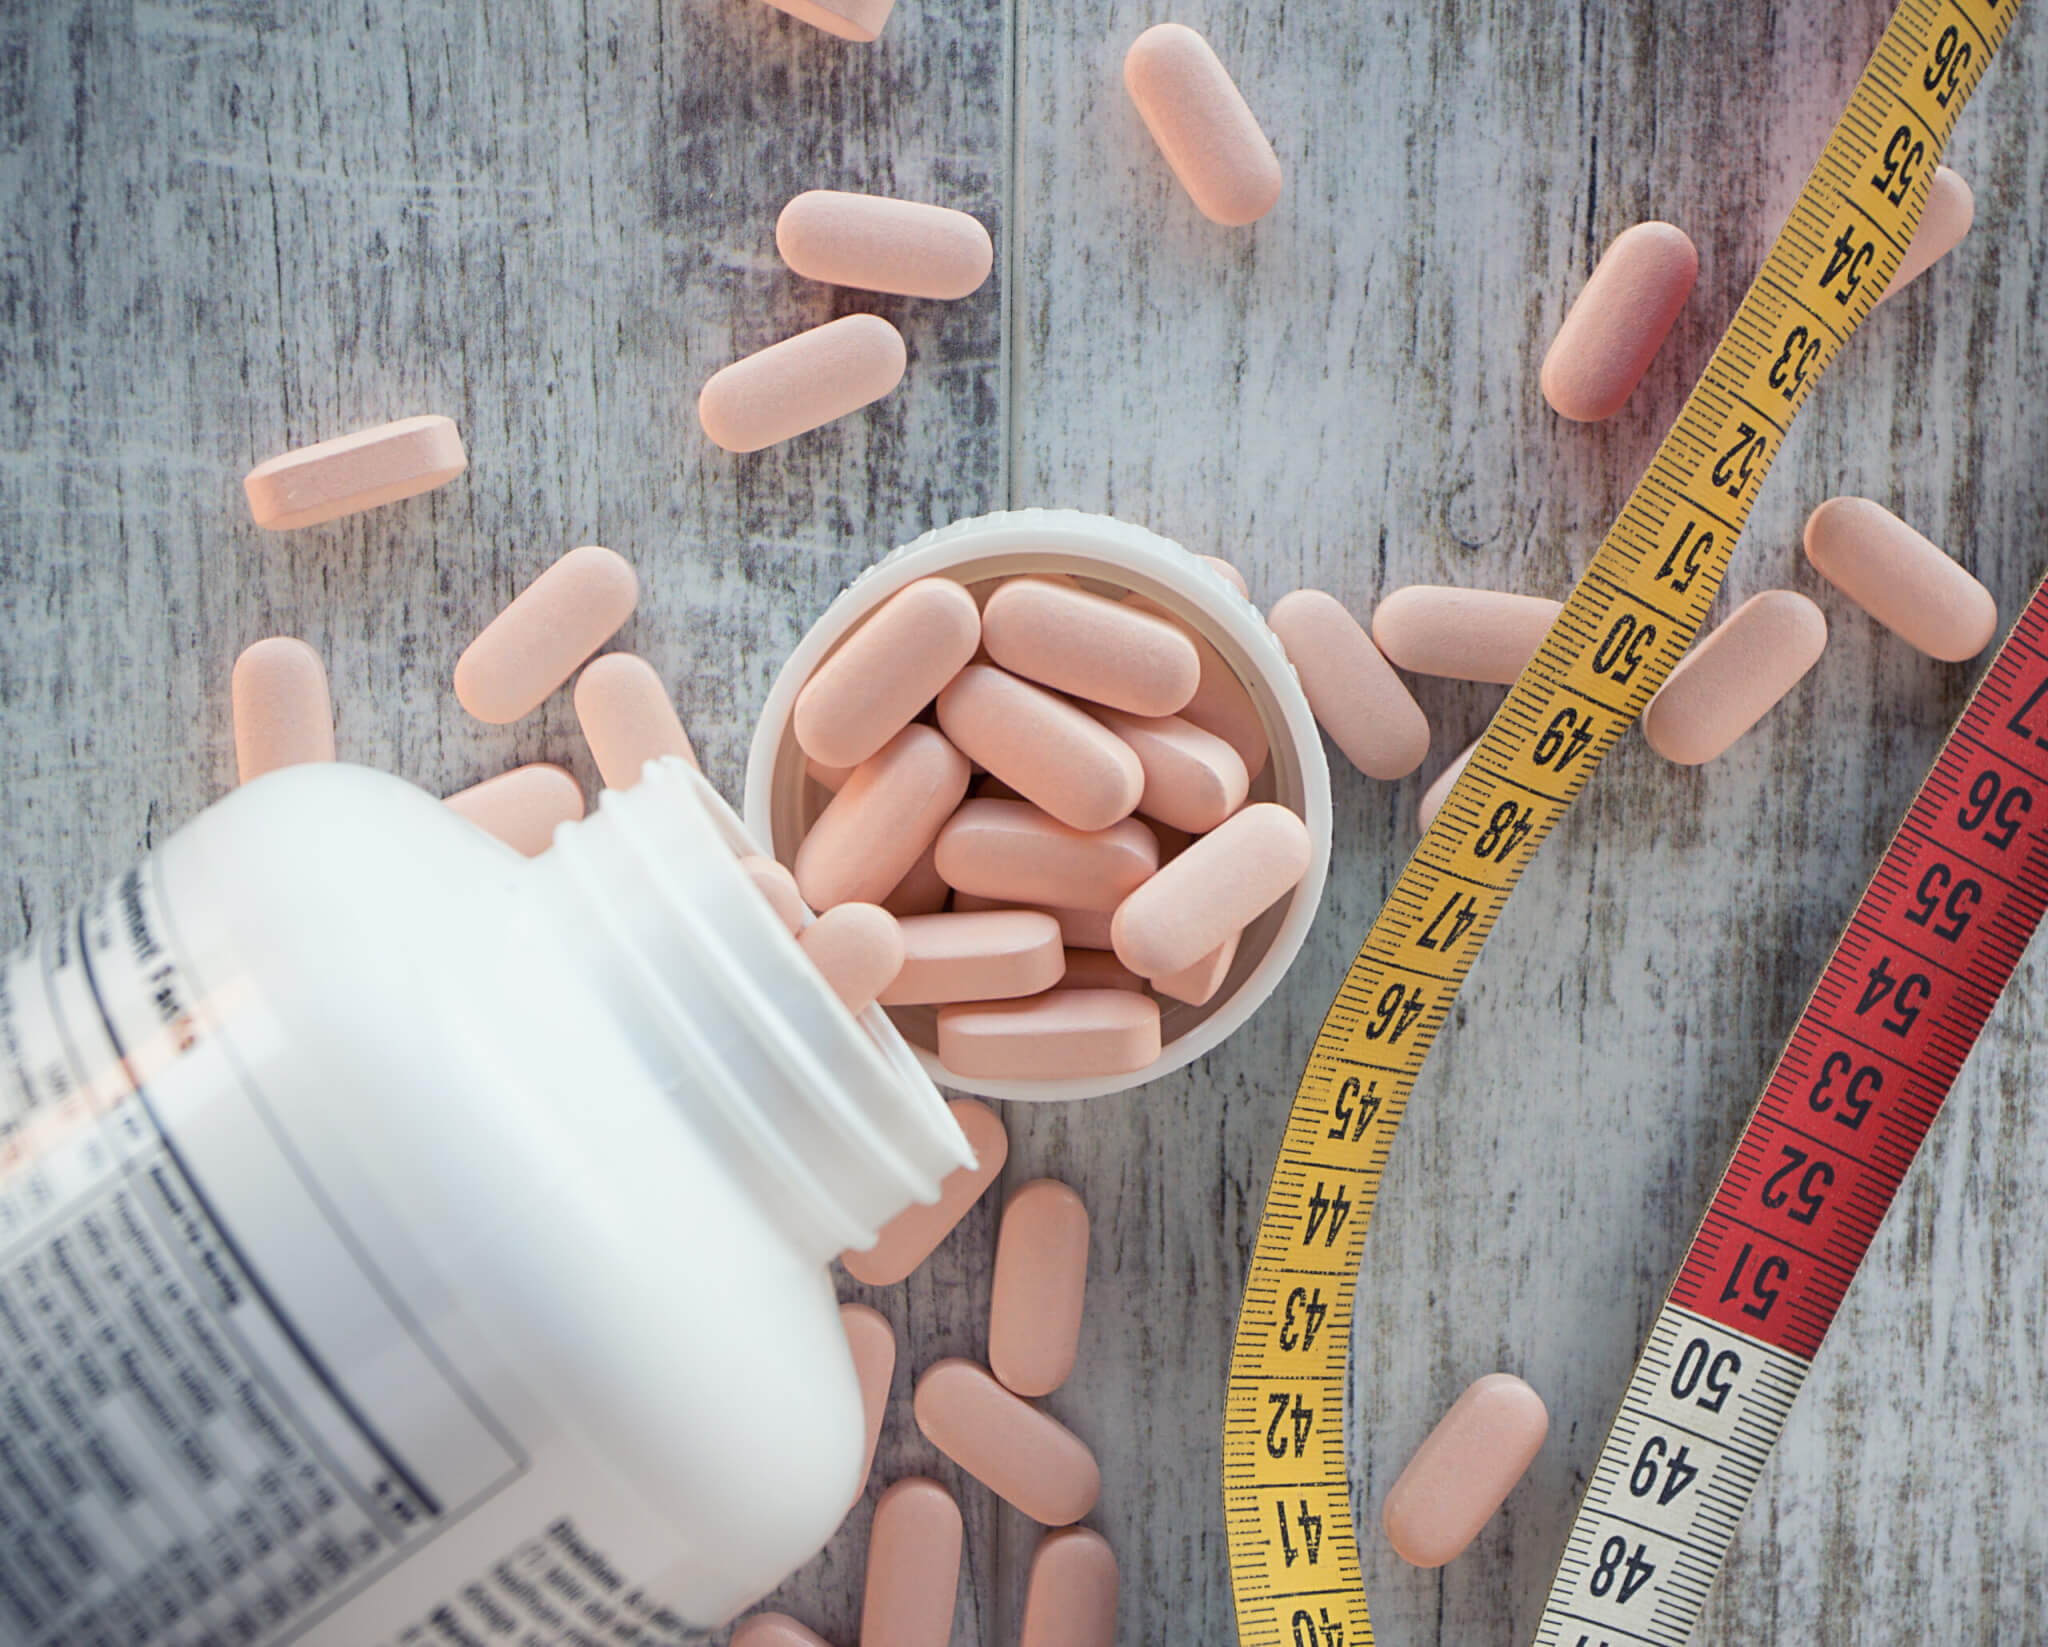 Shady supplements: Weight loss pills are dangerous and ineffective, study warns